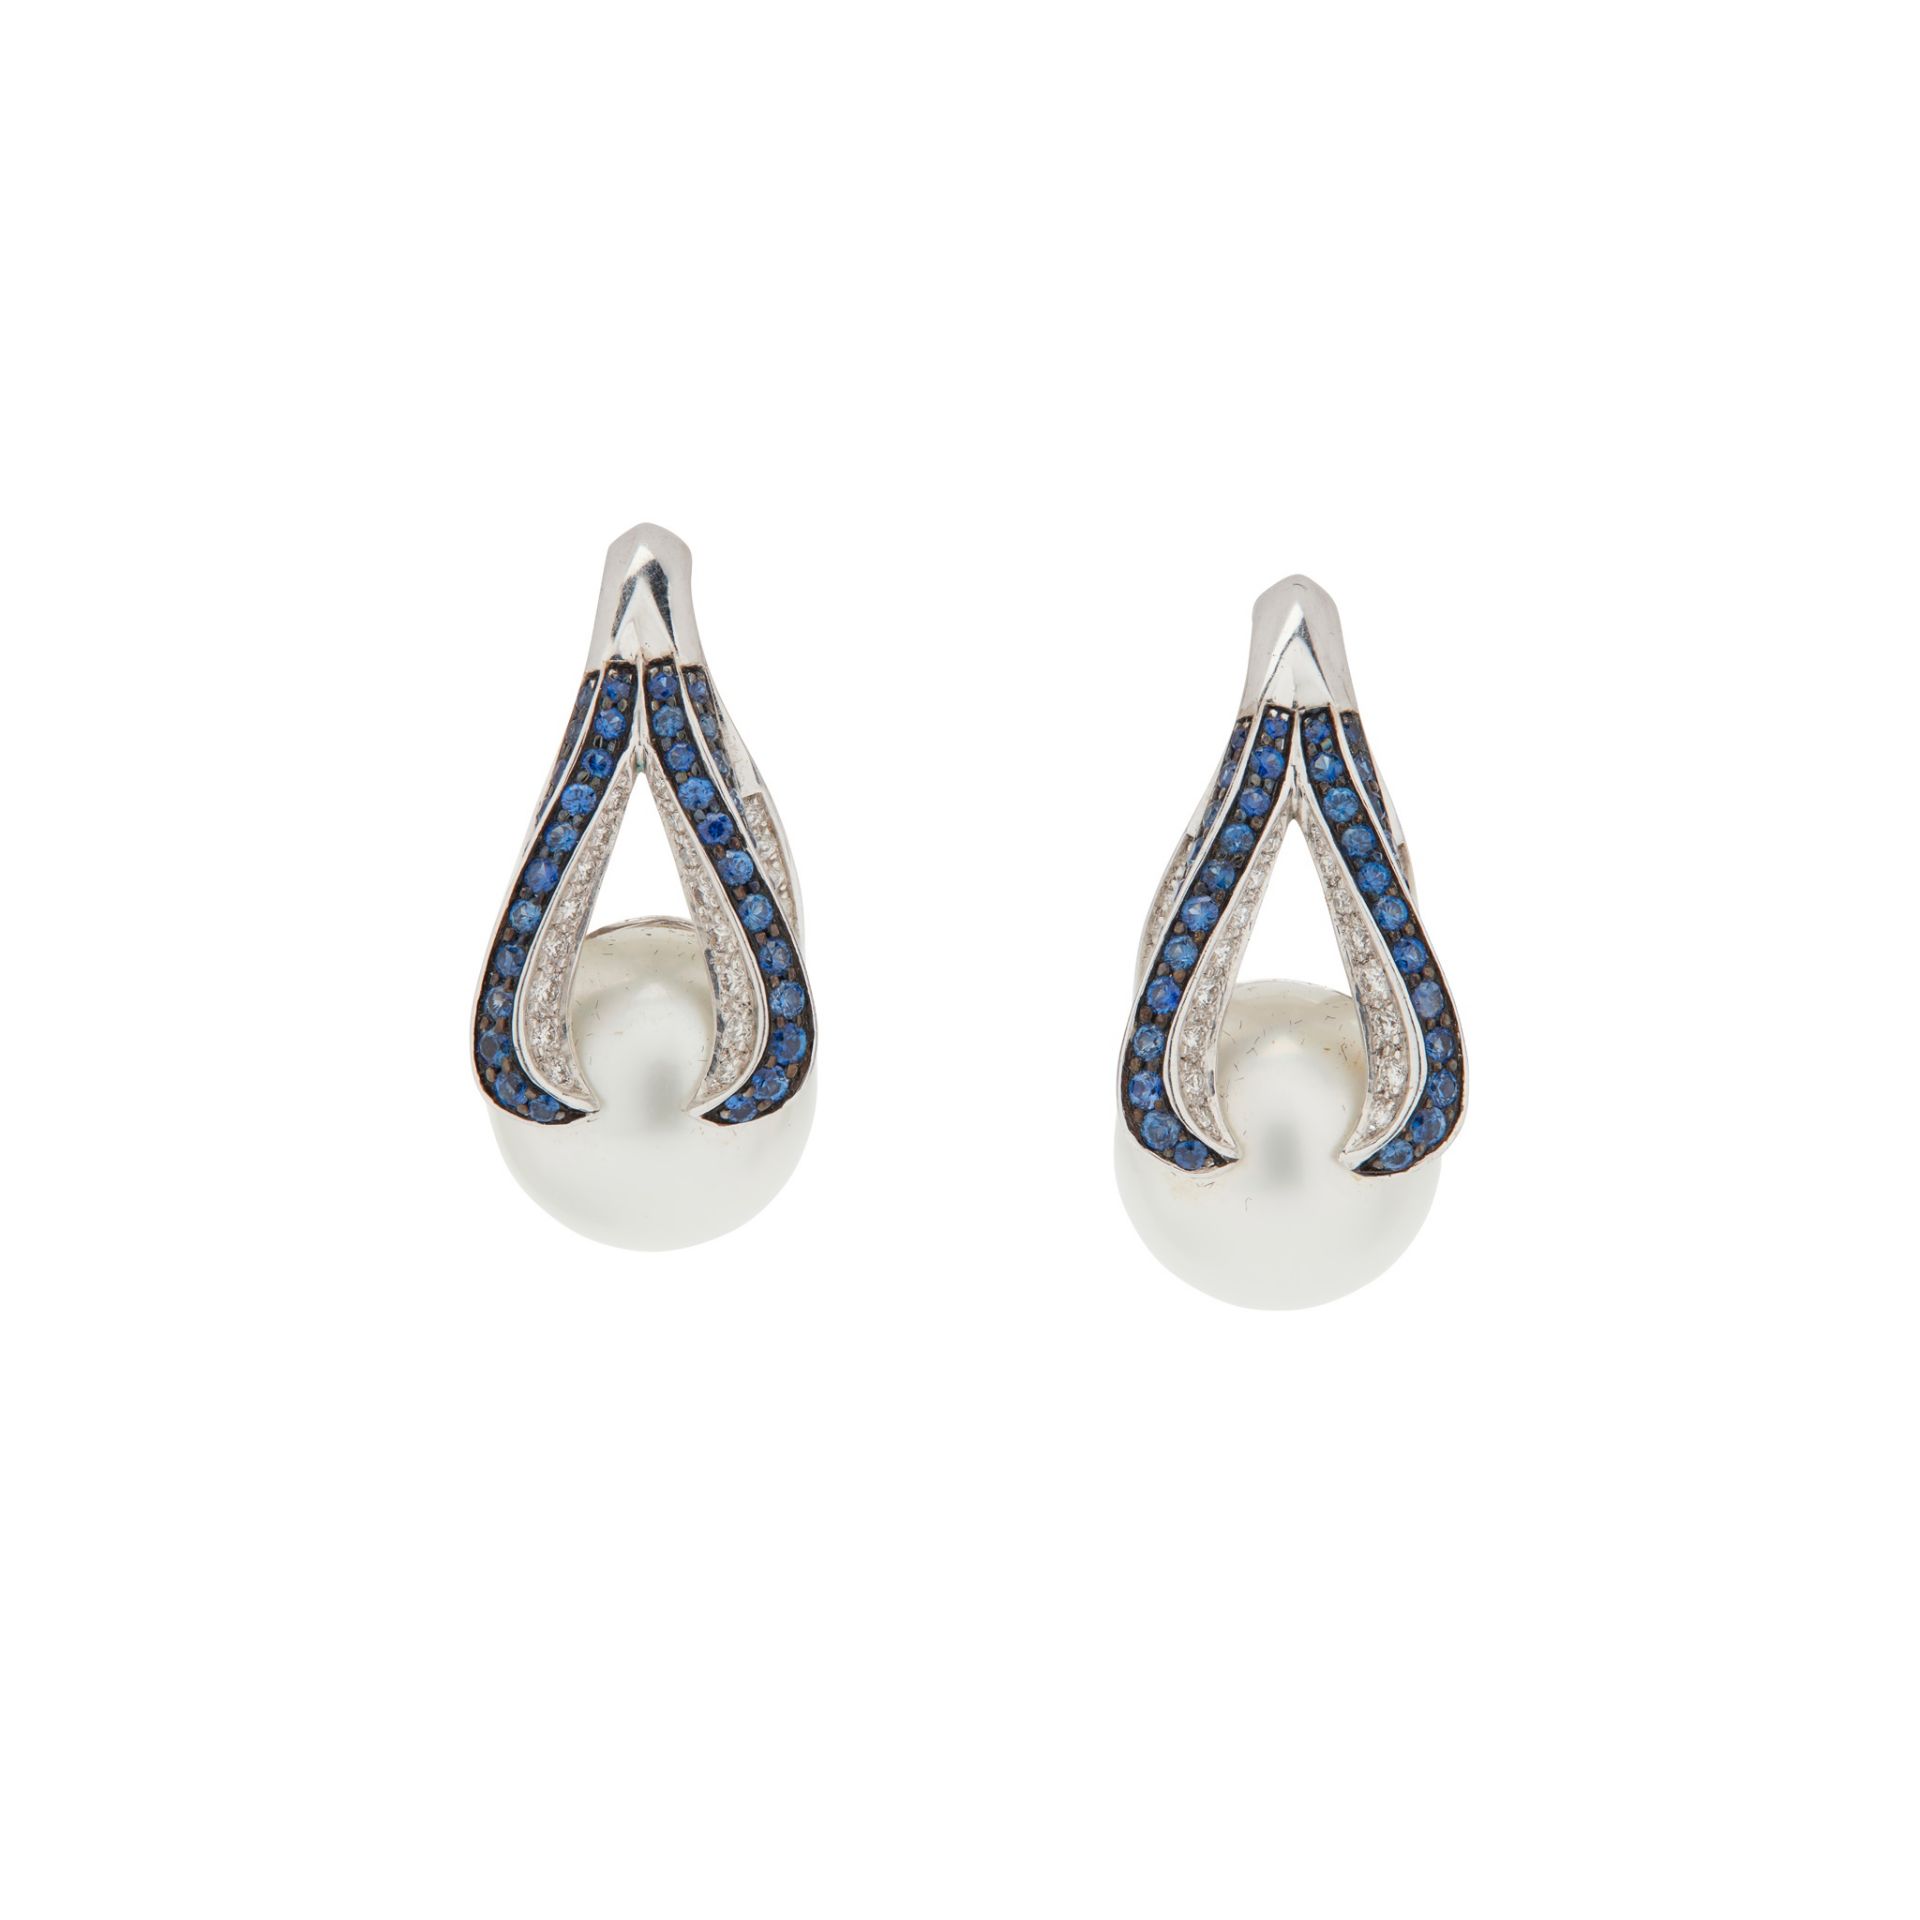 A pair of South Sea pearl, sapphire and diamond earrings